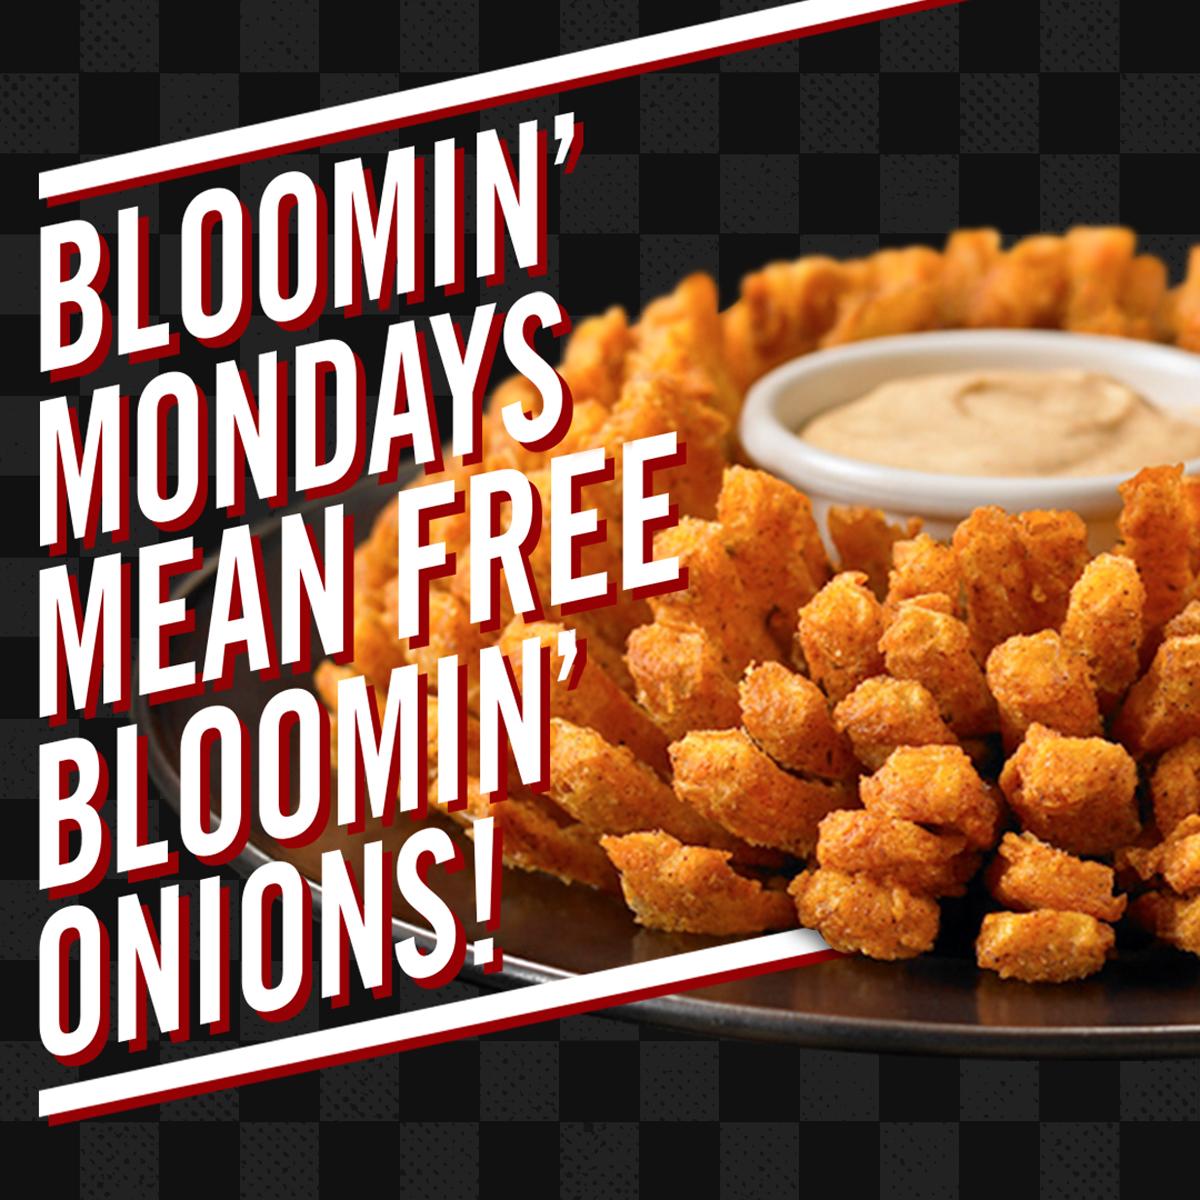 Outback Steakhouse Bloomin Onions On Me Kevinharvick Visit Us For Your Free Bloomin Onion With Purchase On Monday April 9th